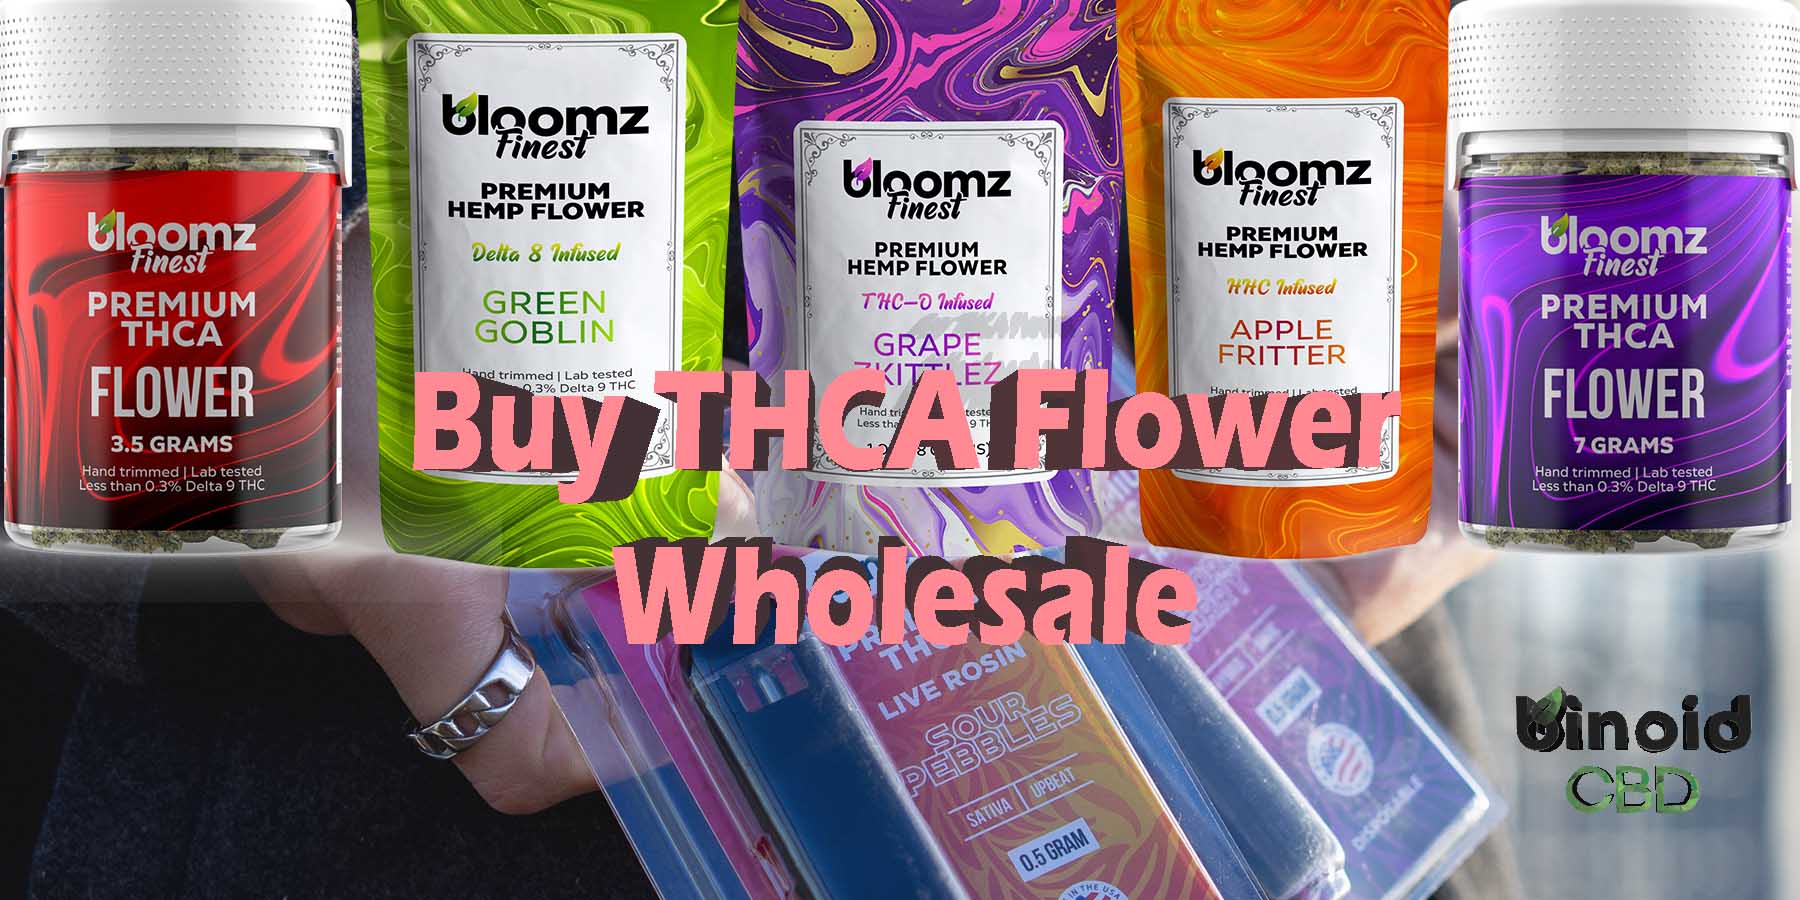 Buy THCA Flower Wholesale Distribution For Sale Best Price Brand Near Me Legal Store Shop Lowest Price Binoid